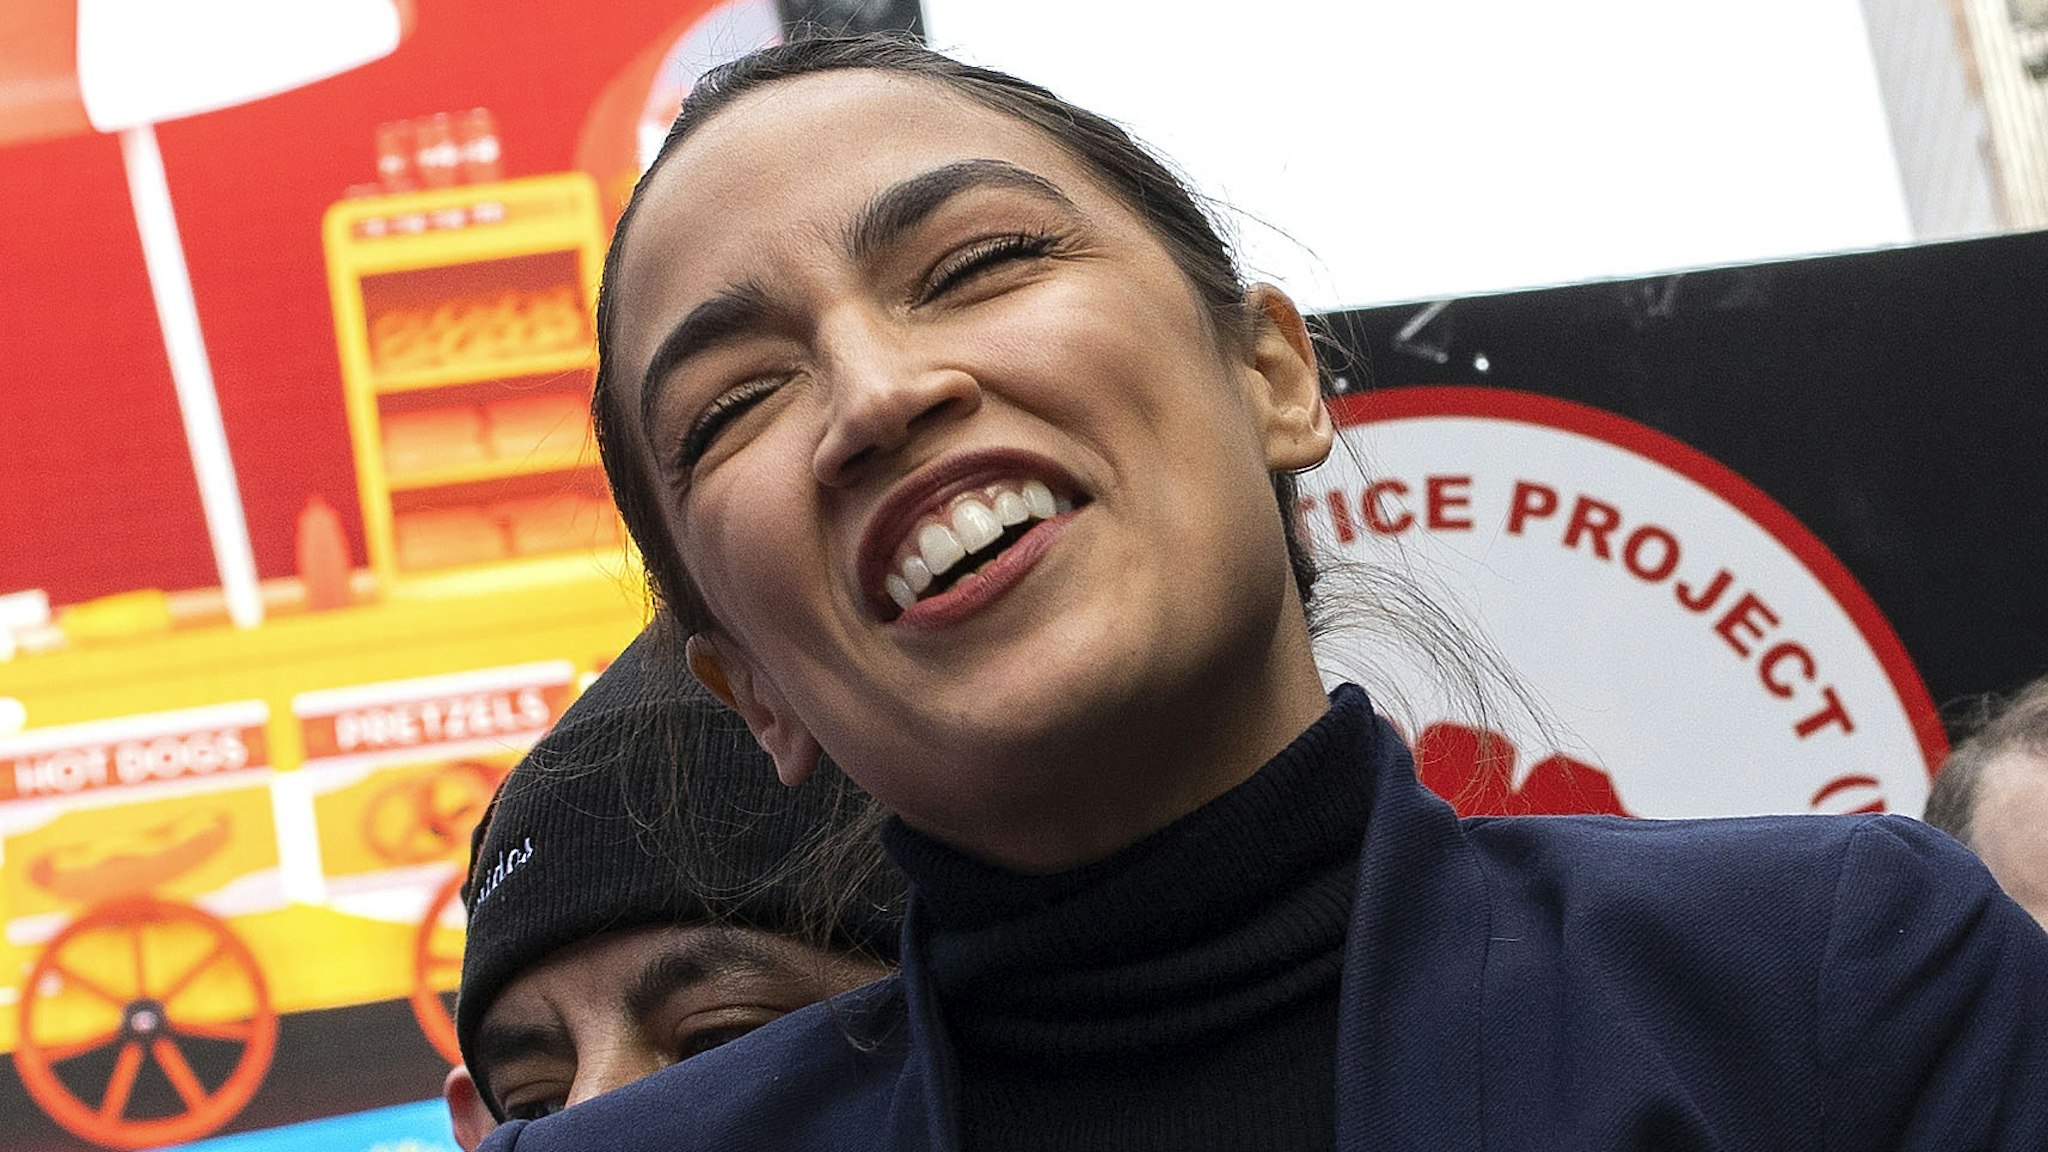 NEW YORK, NEW YORK - JANUARY 23: Congresswoman Alexandria Ocasio-Cortez joins delivery workers to celebrate the passage of legislation by the New York City Council guaranteeing them basic labor rights such as wages, tips, and rest areas, January 23, 2022 in Times Square, New York City.